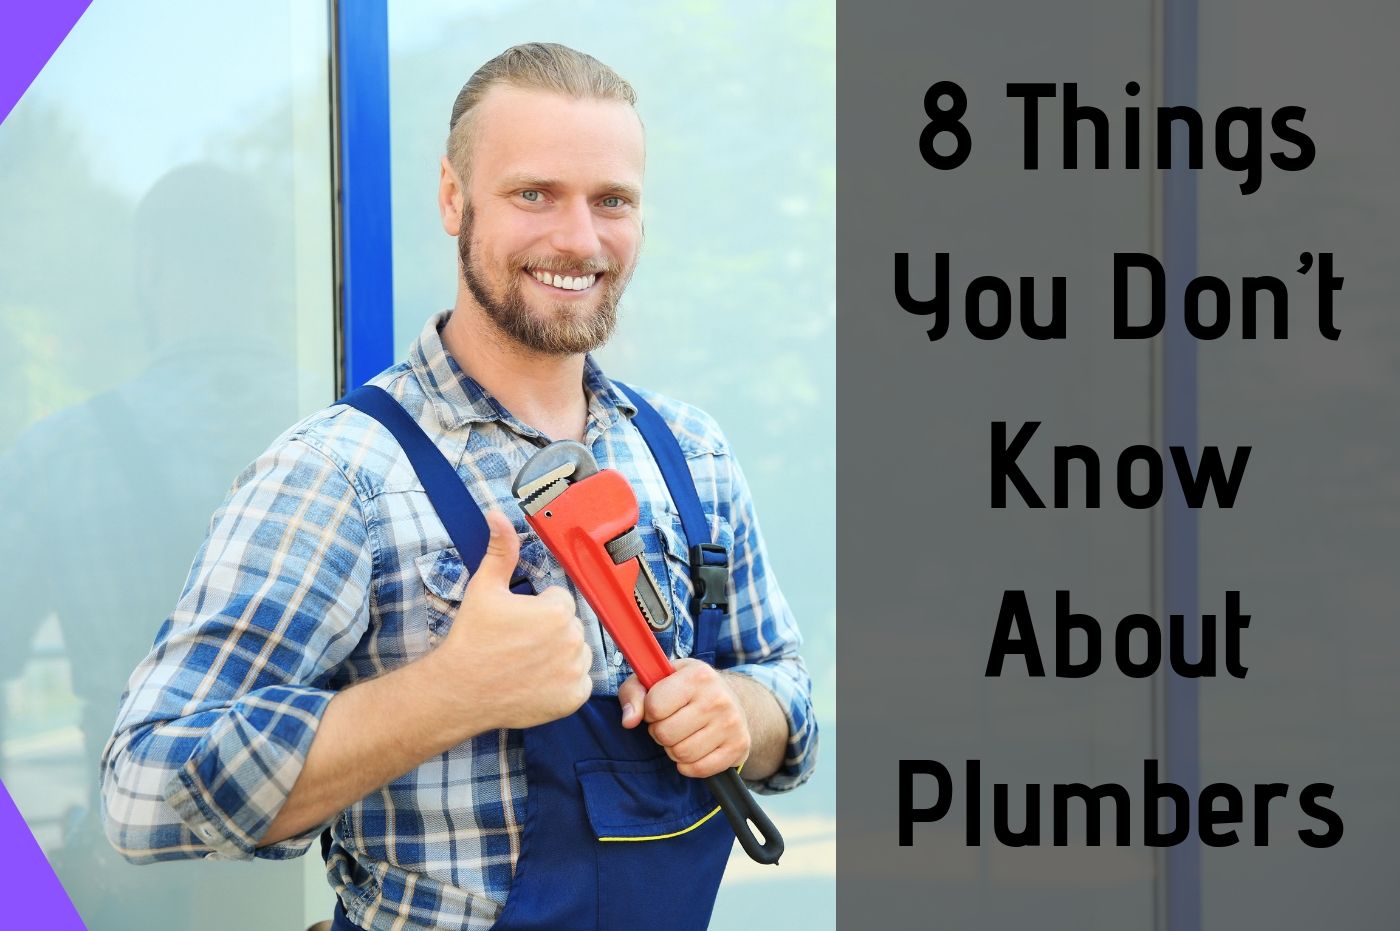 8 Things You Don’t Know About Plumbers